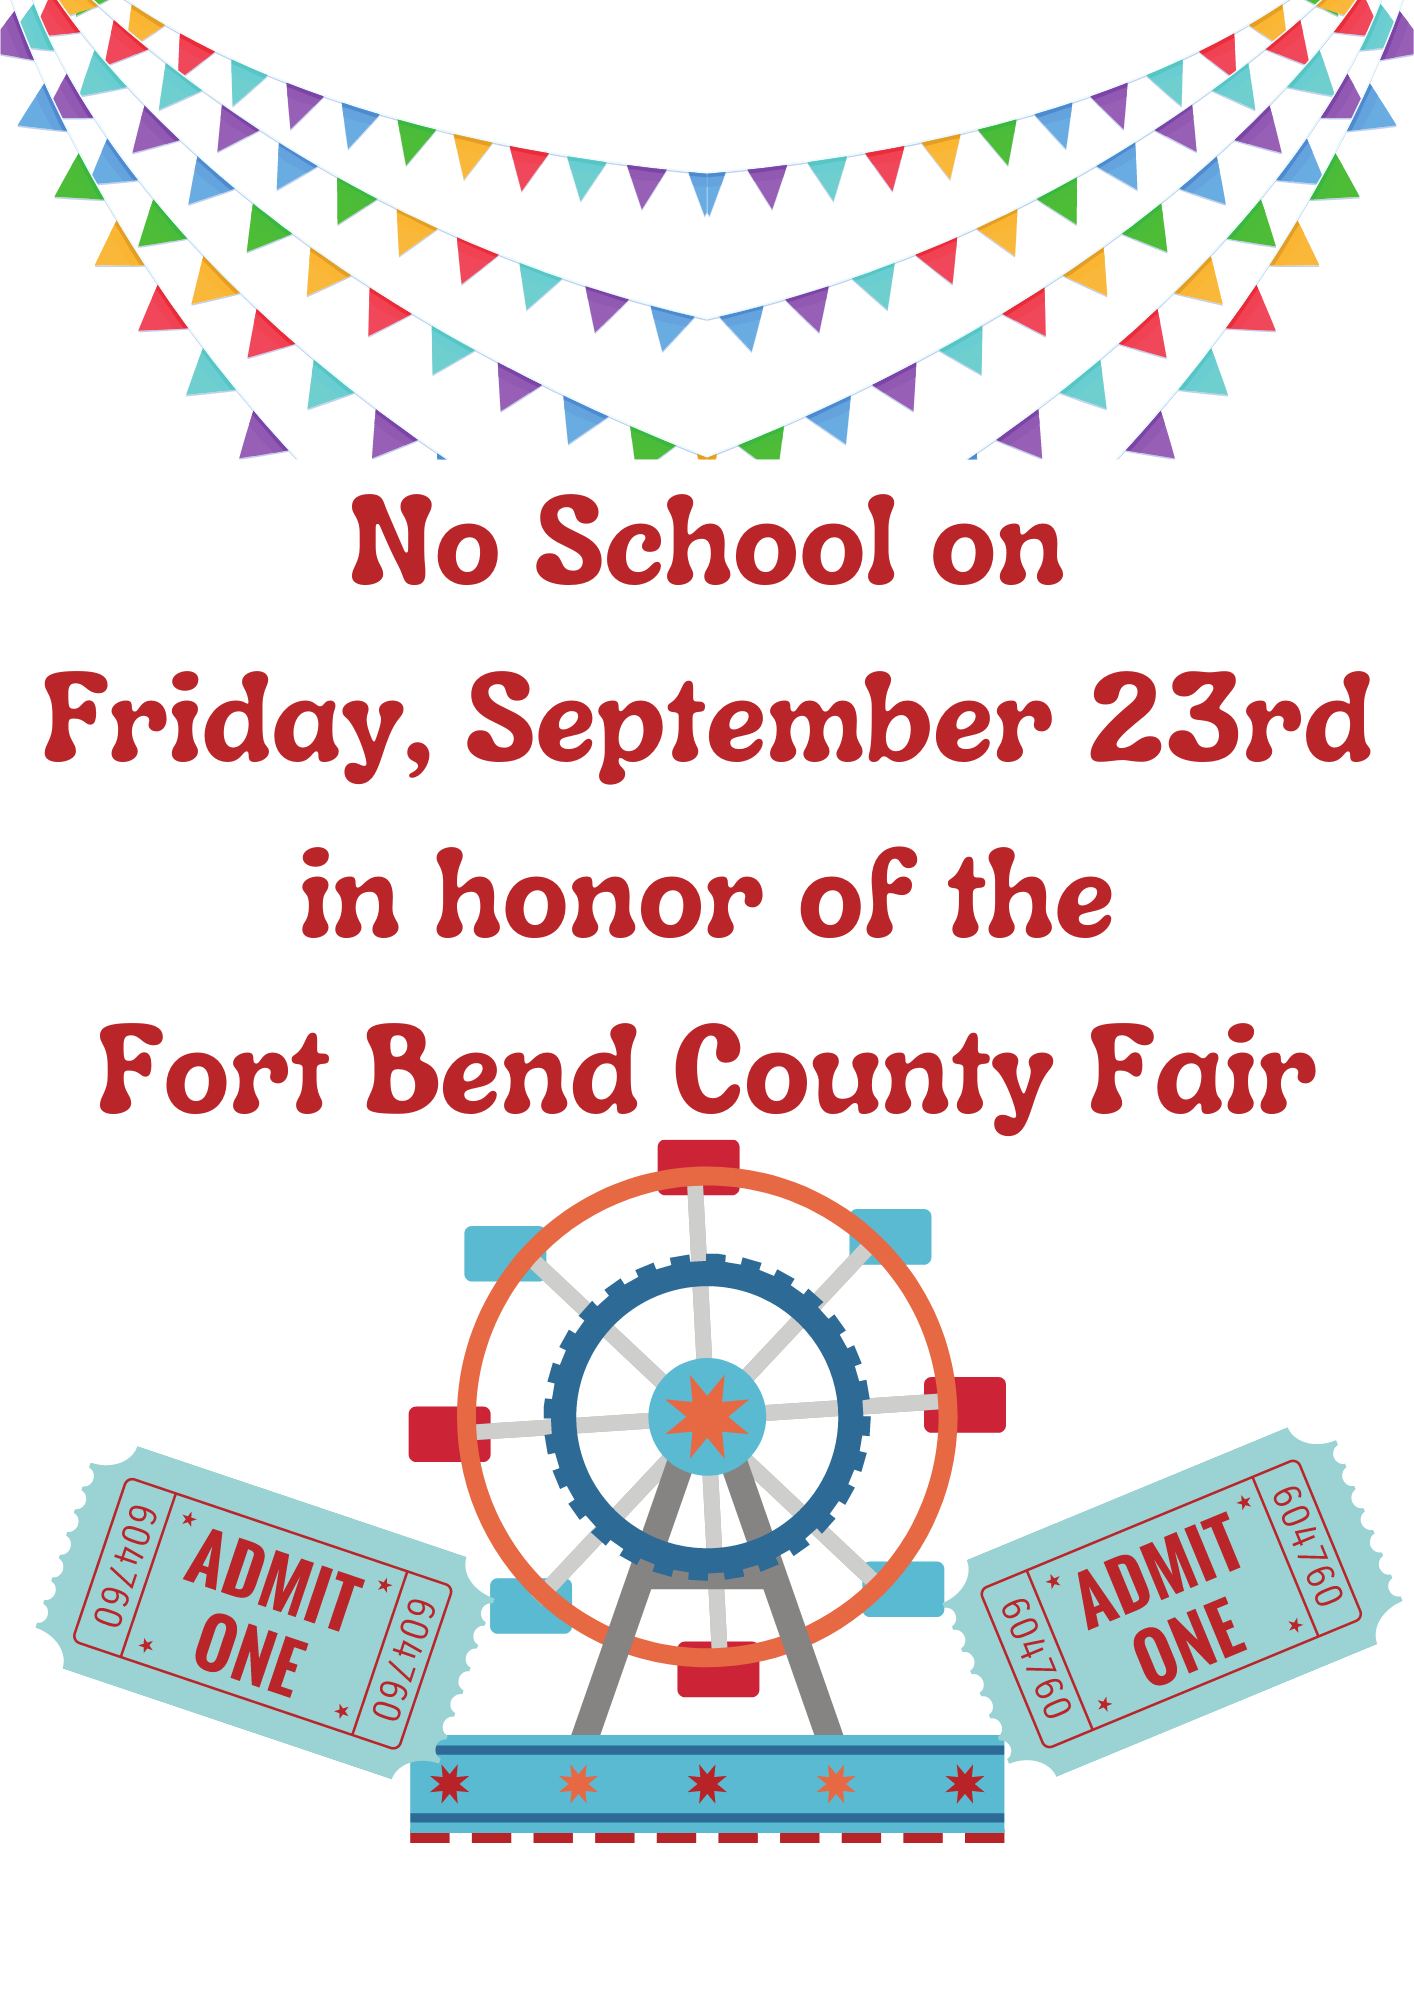 No School on Friday, September 23rd in honor of the Fort Bend County Fair